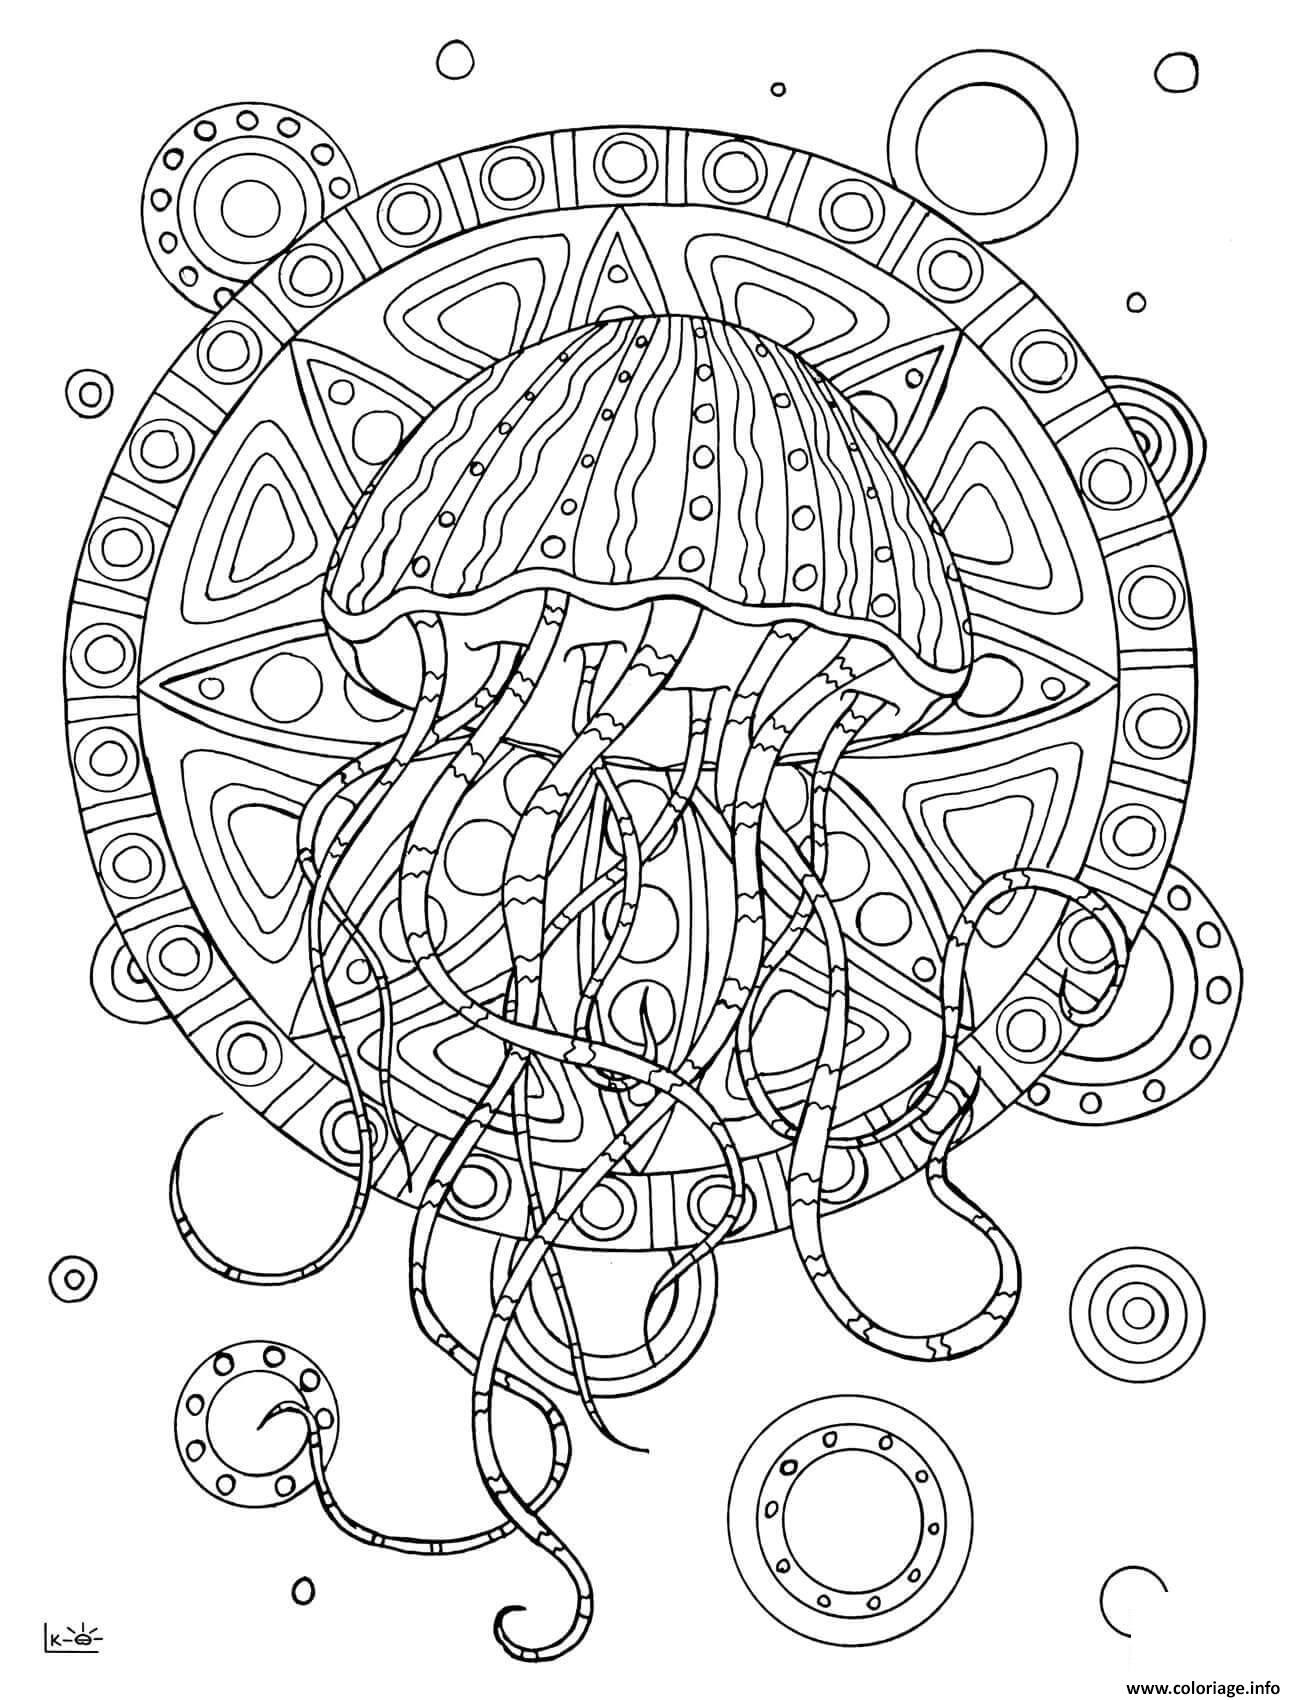 Jellyfish Coloring Pages For Adults
 Coloriage jellyfish with tribal pattern adulte JeColorie